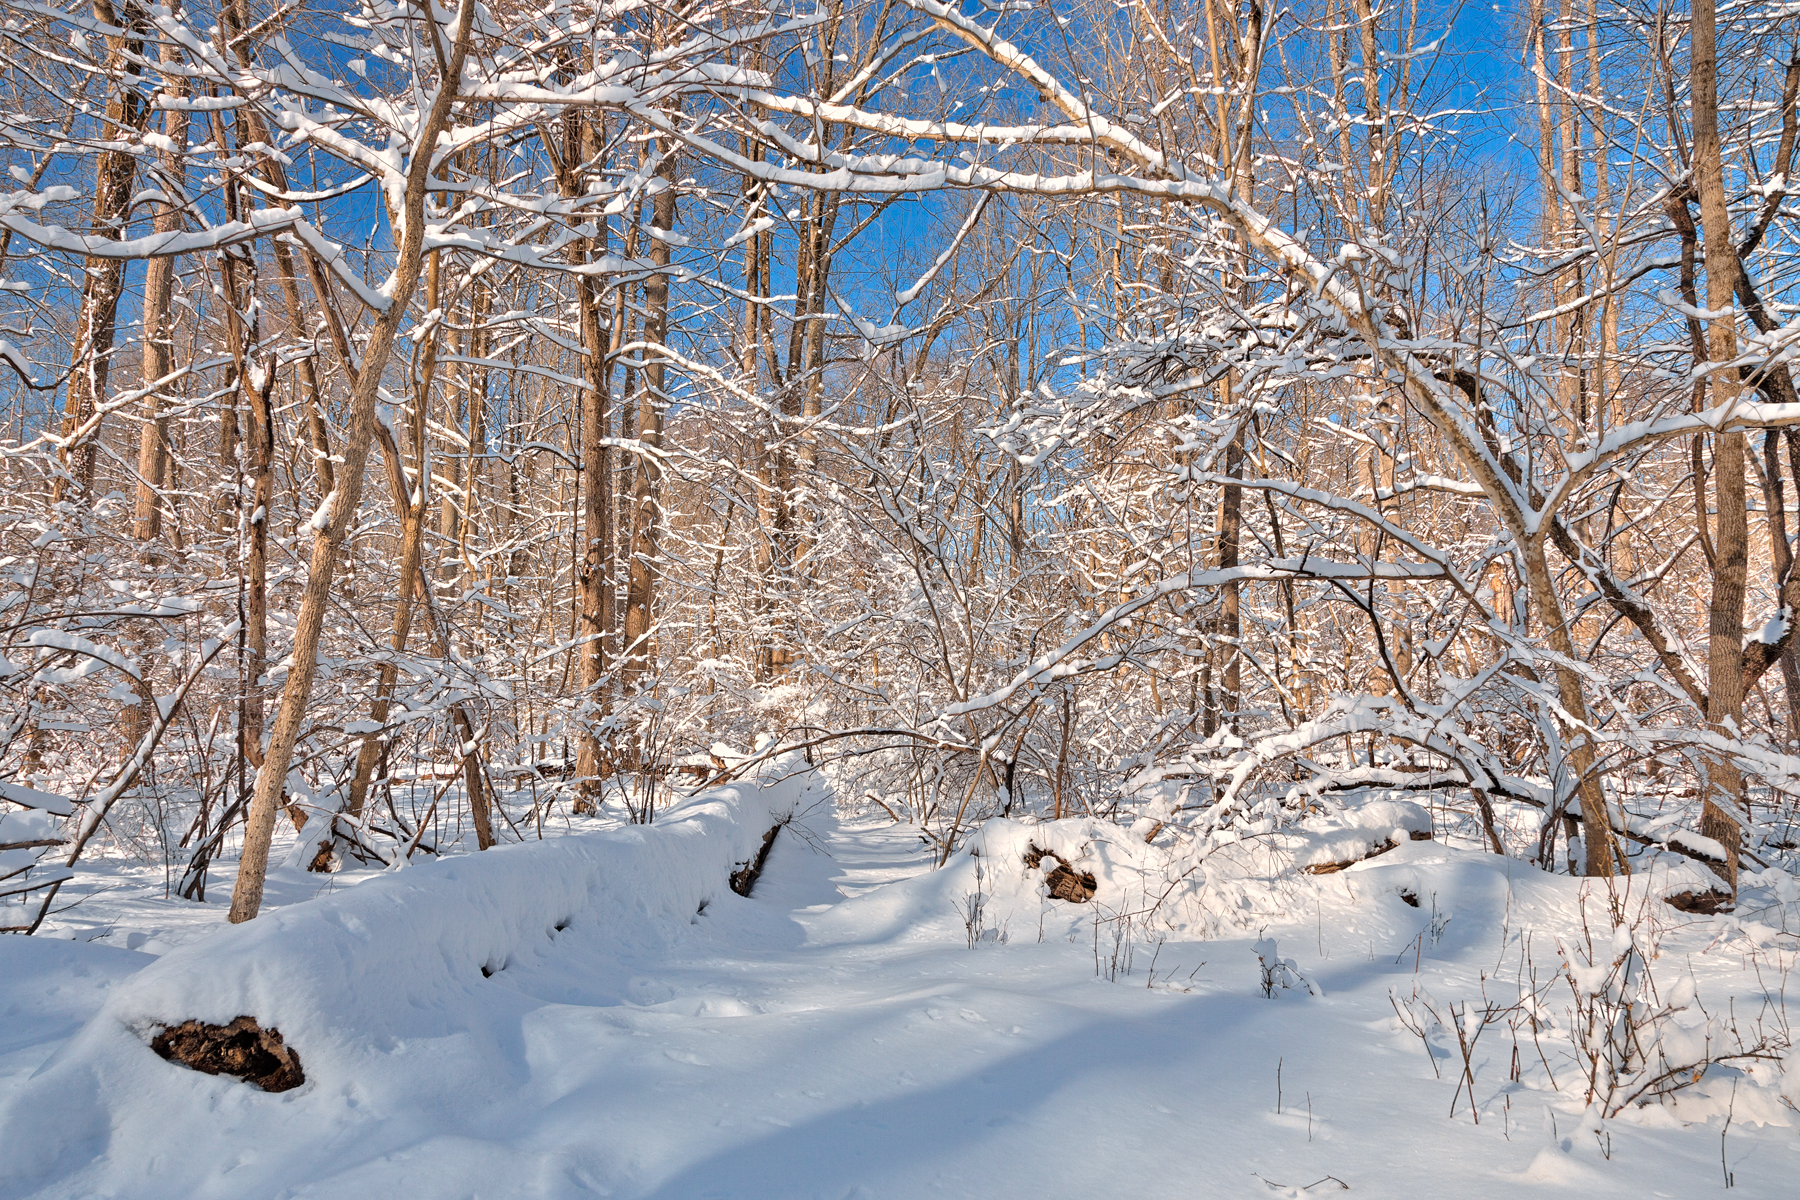 Susquehanna winter forest - hdr photo